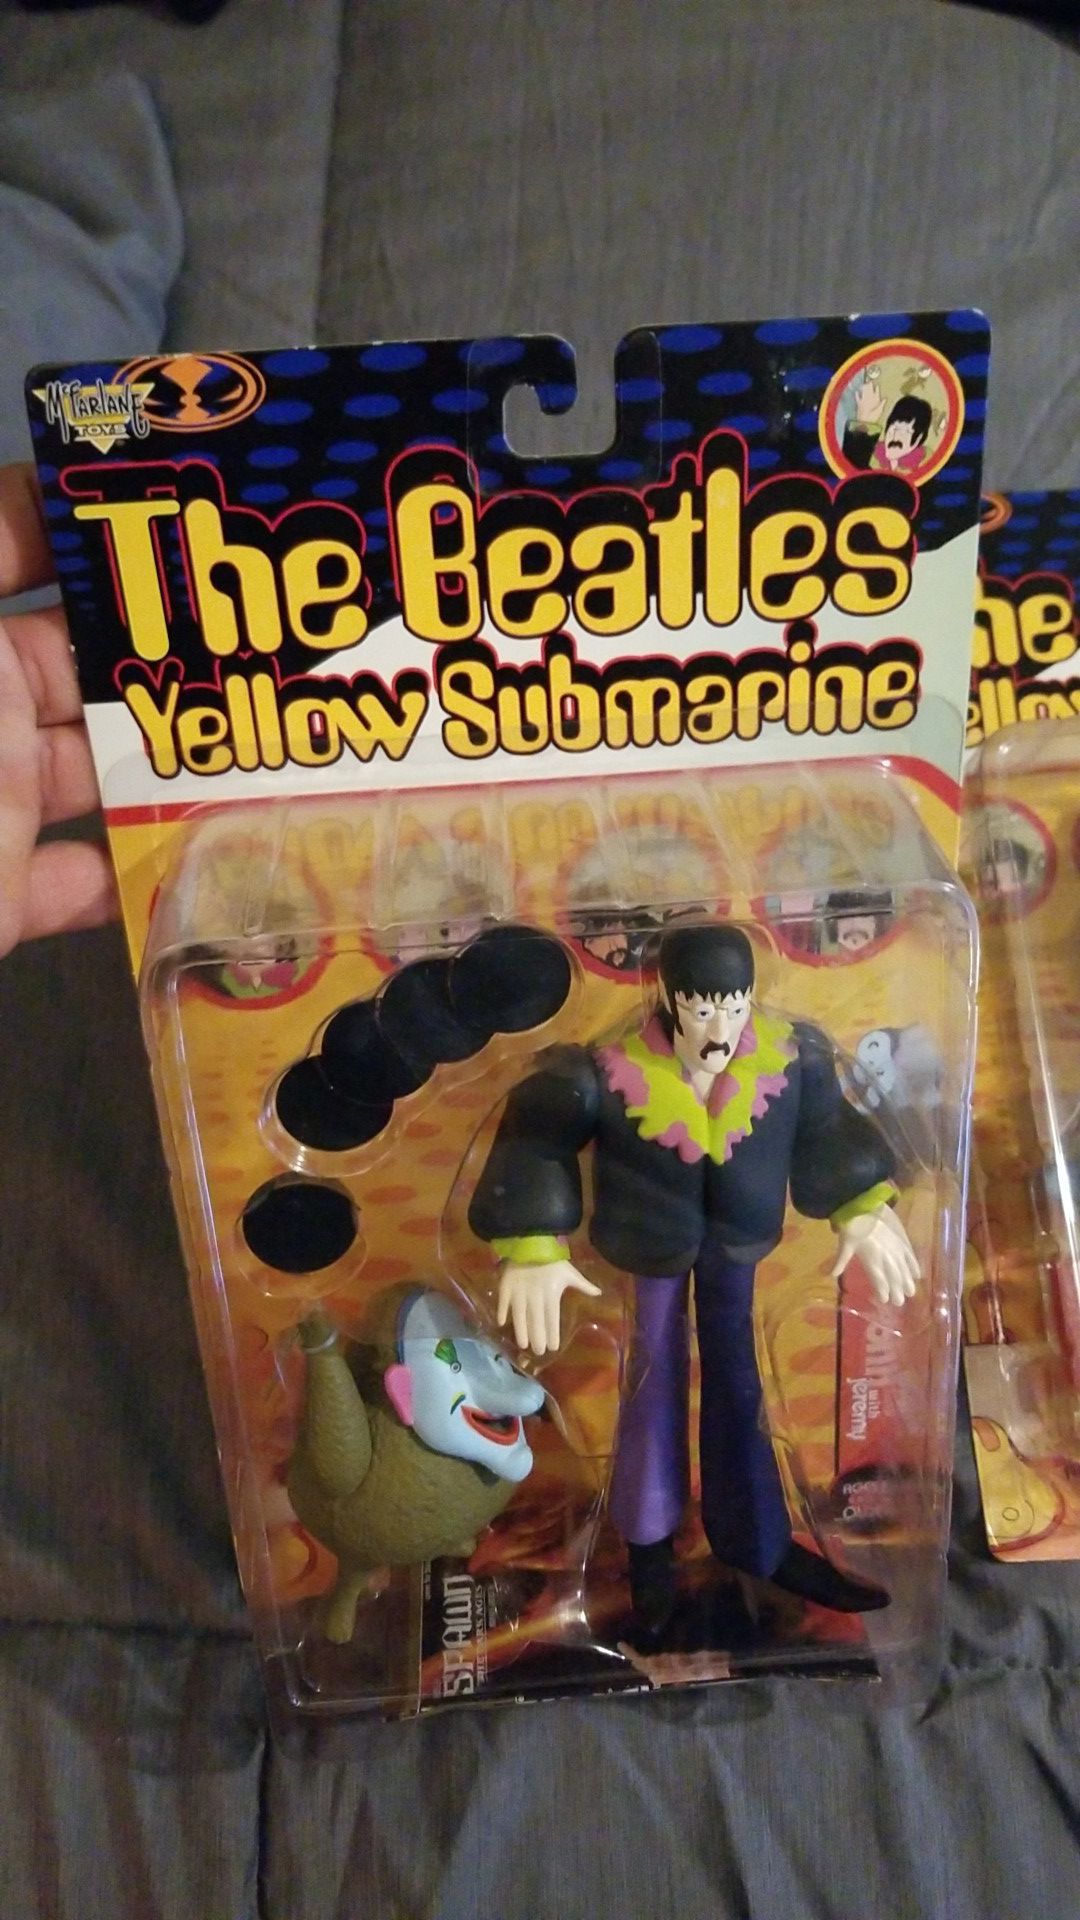 The Beatles Yellow Submarine action figures